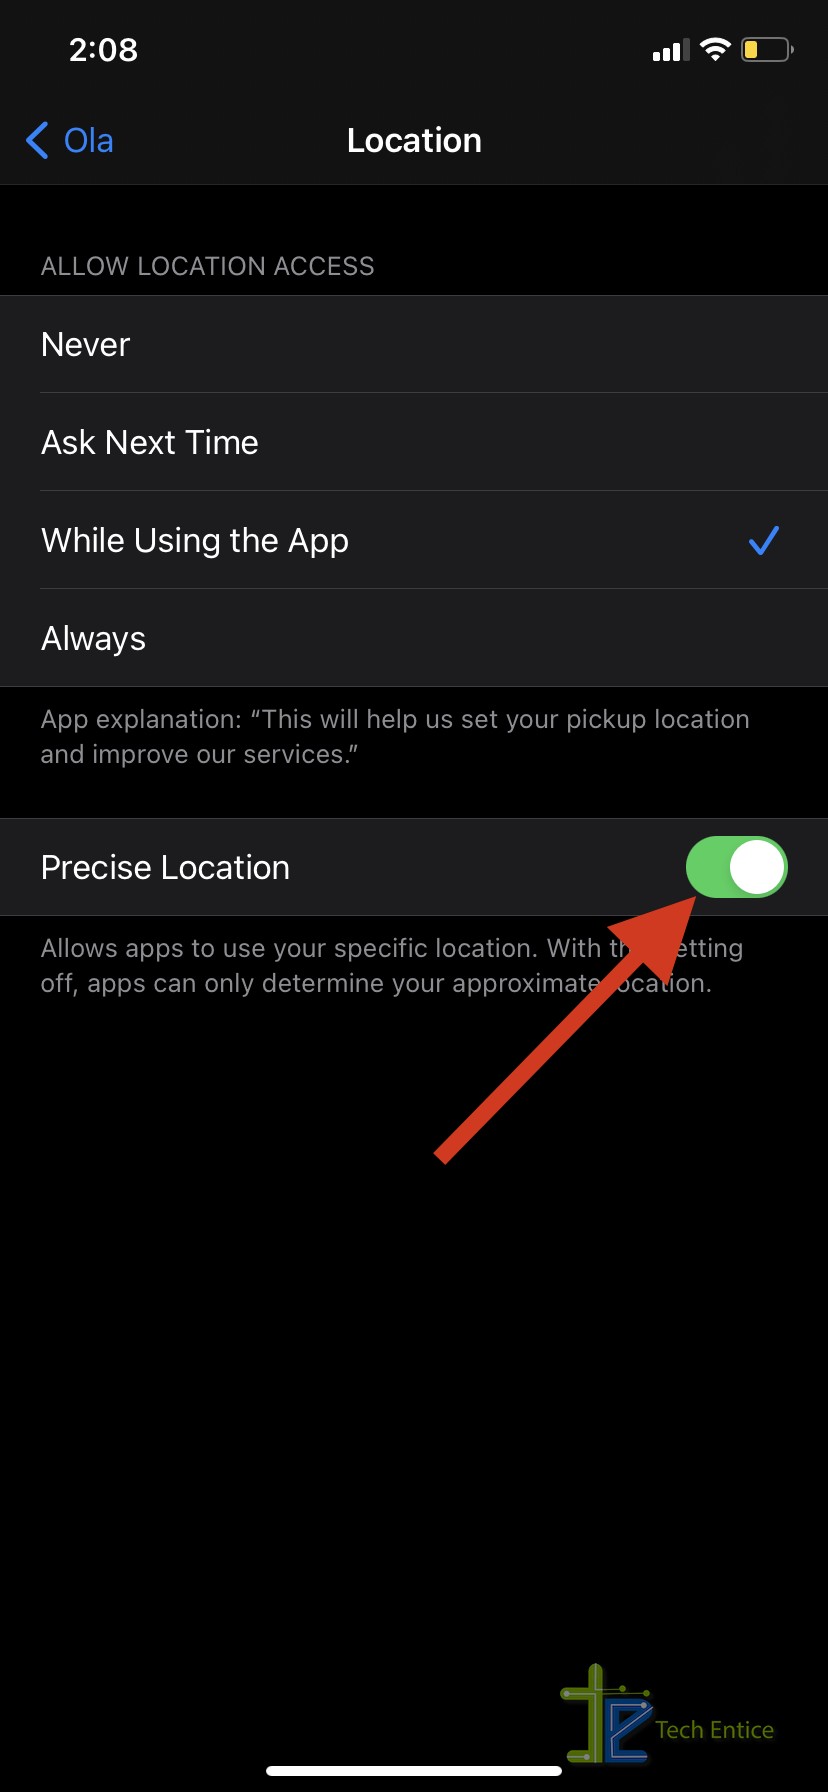 How To Disable Precise Location On iOS?